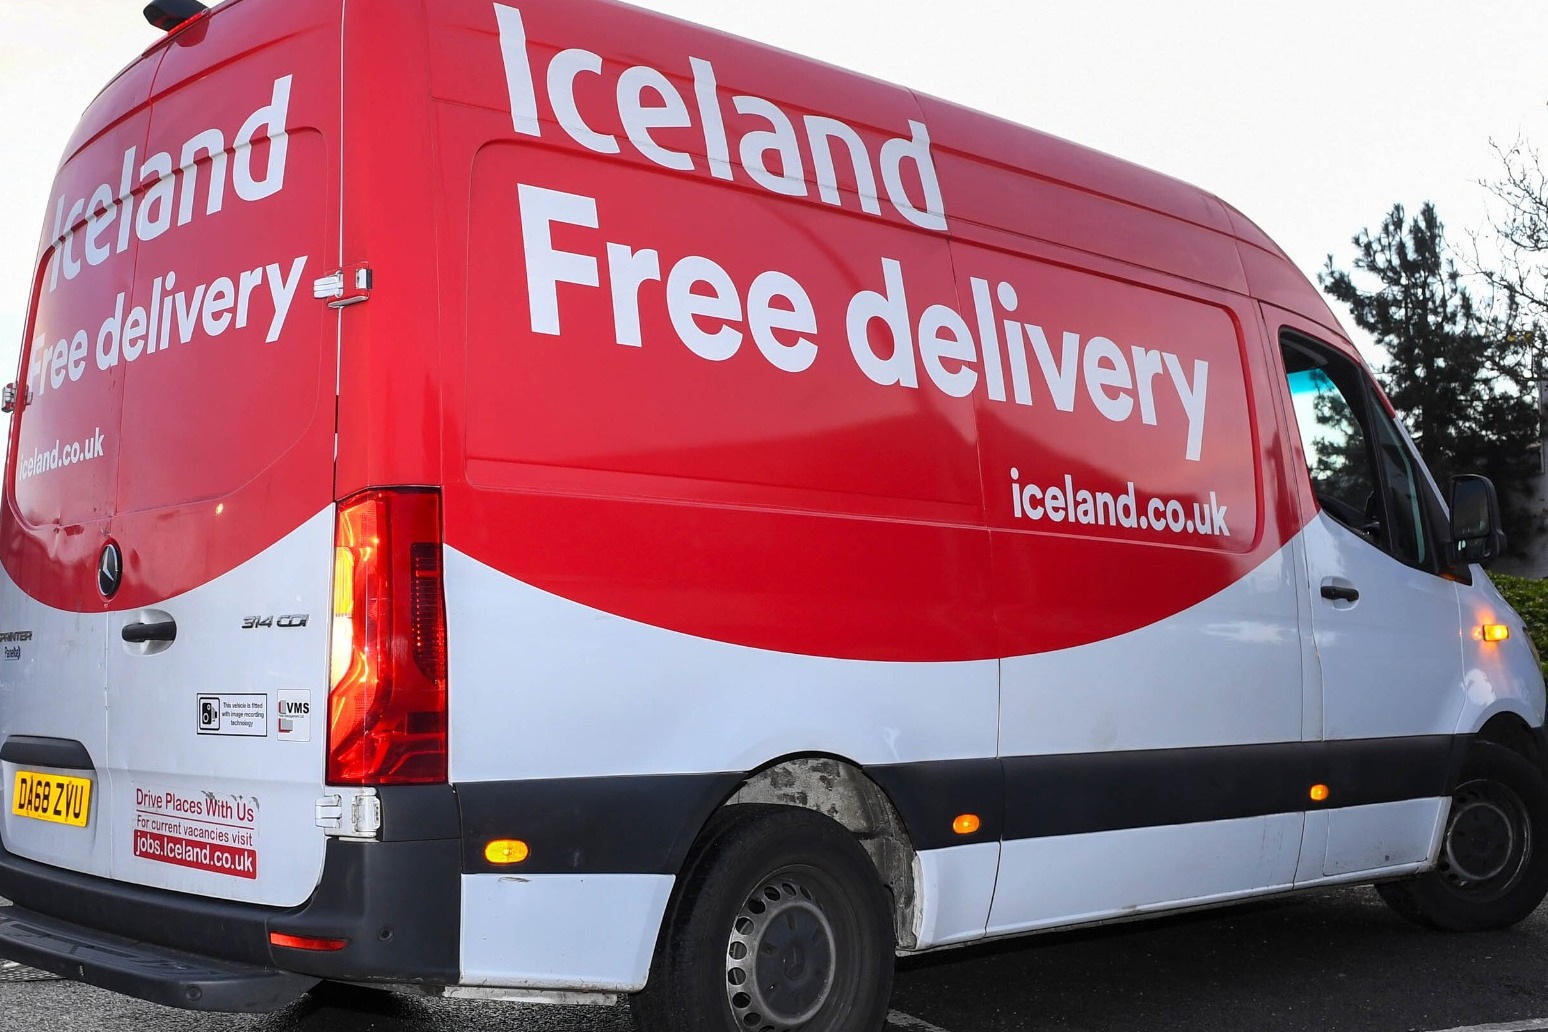 Iceland to introduce 10% discount for shoppers aged over 60 